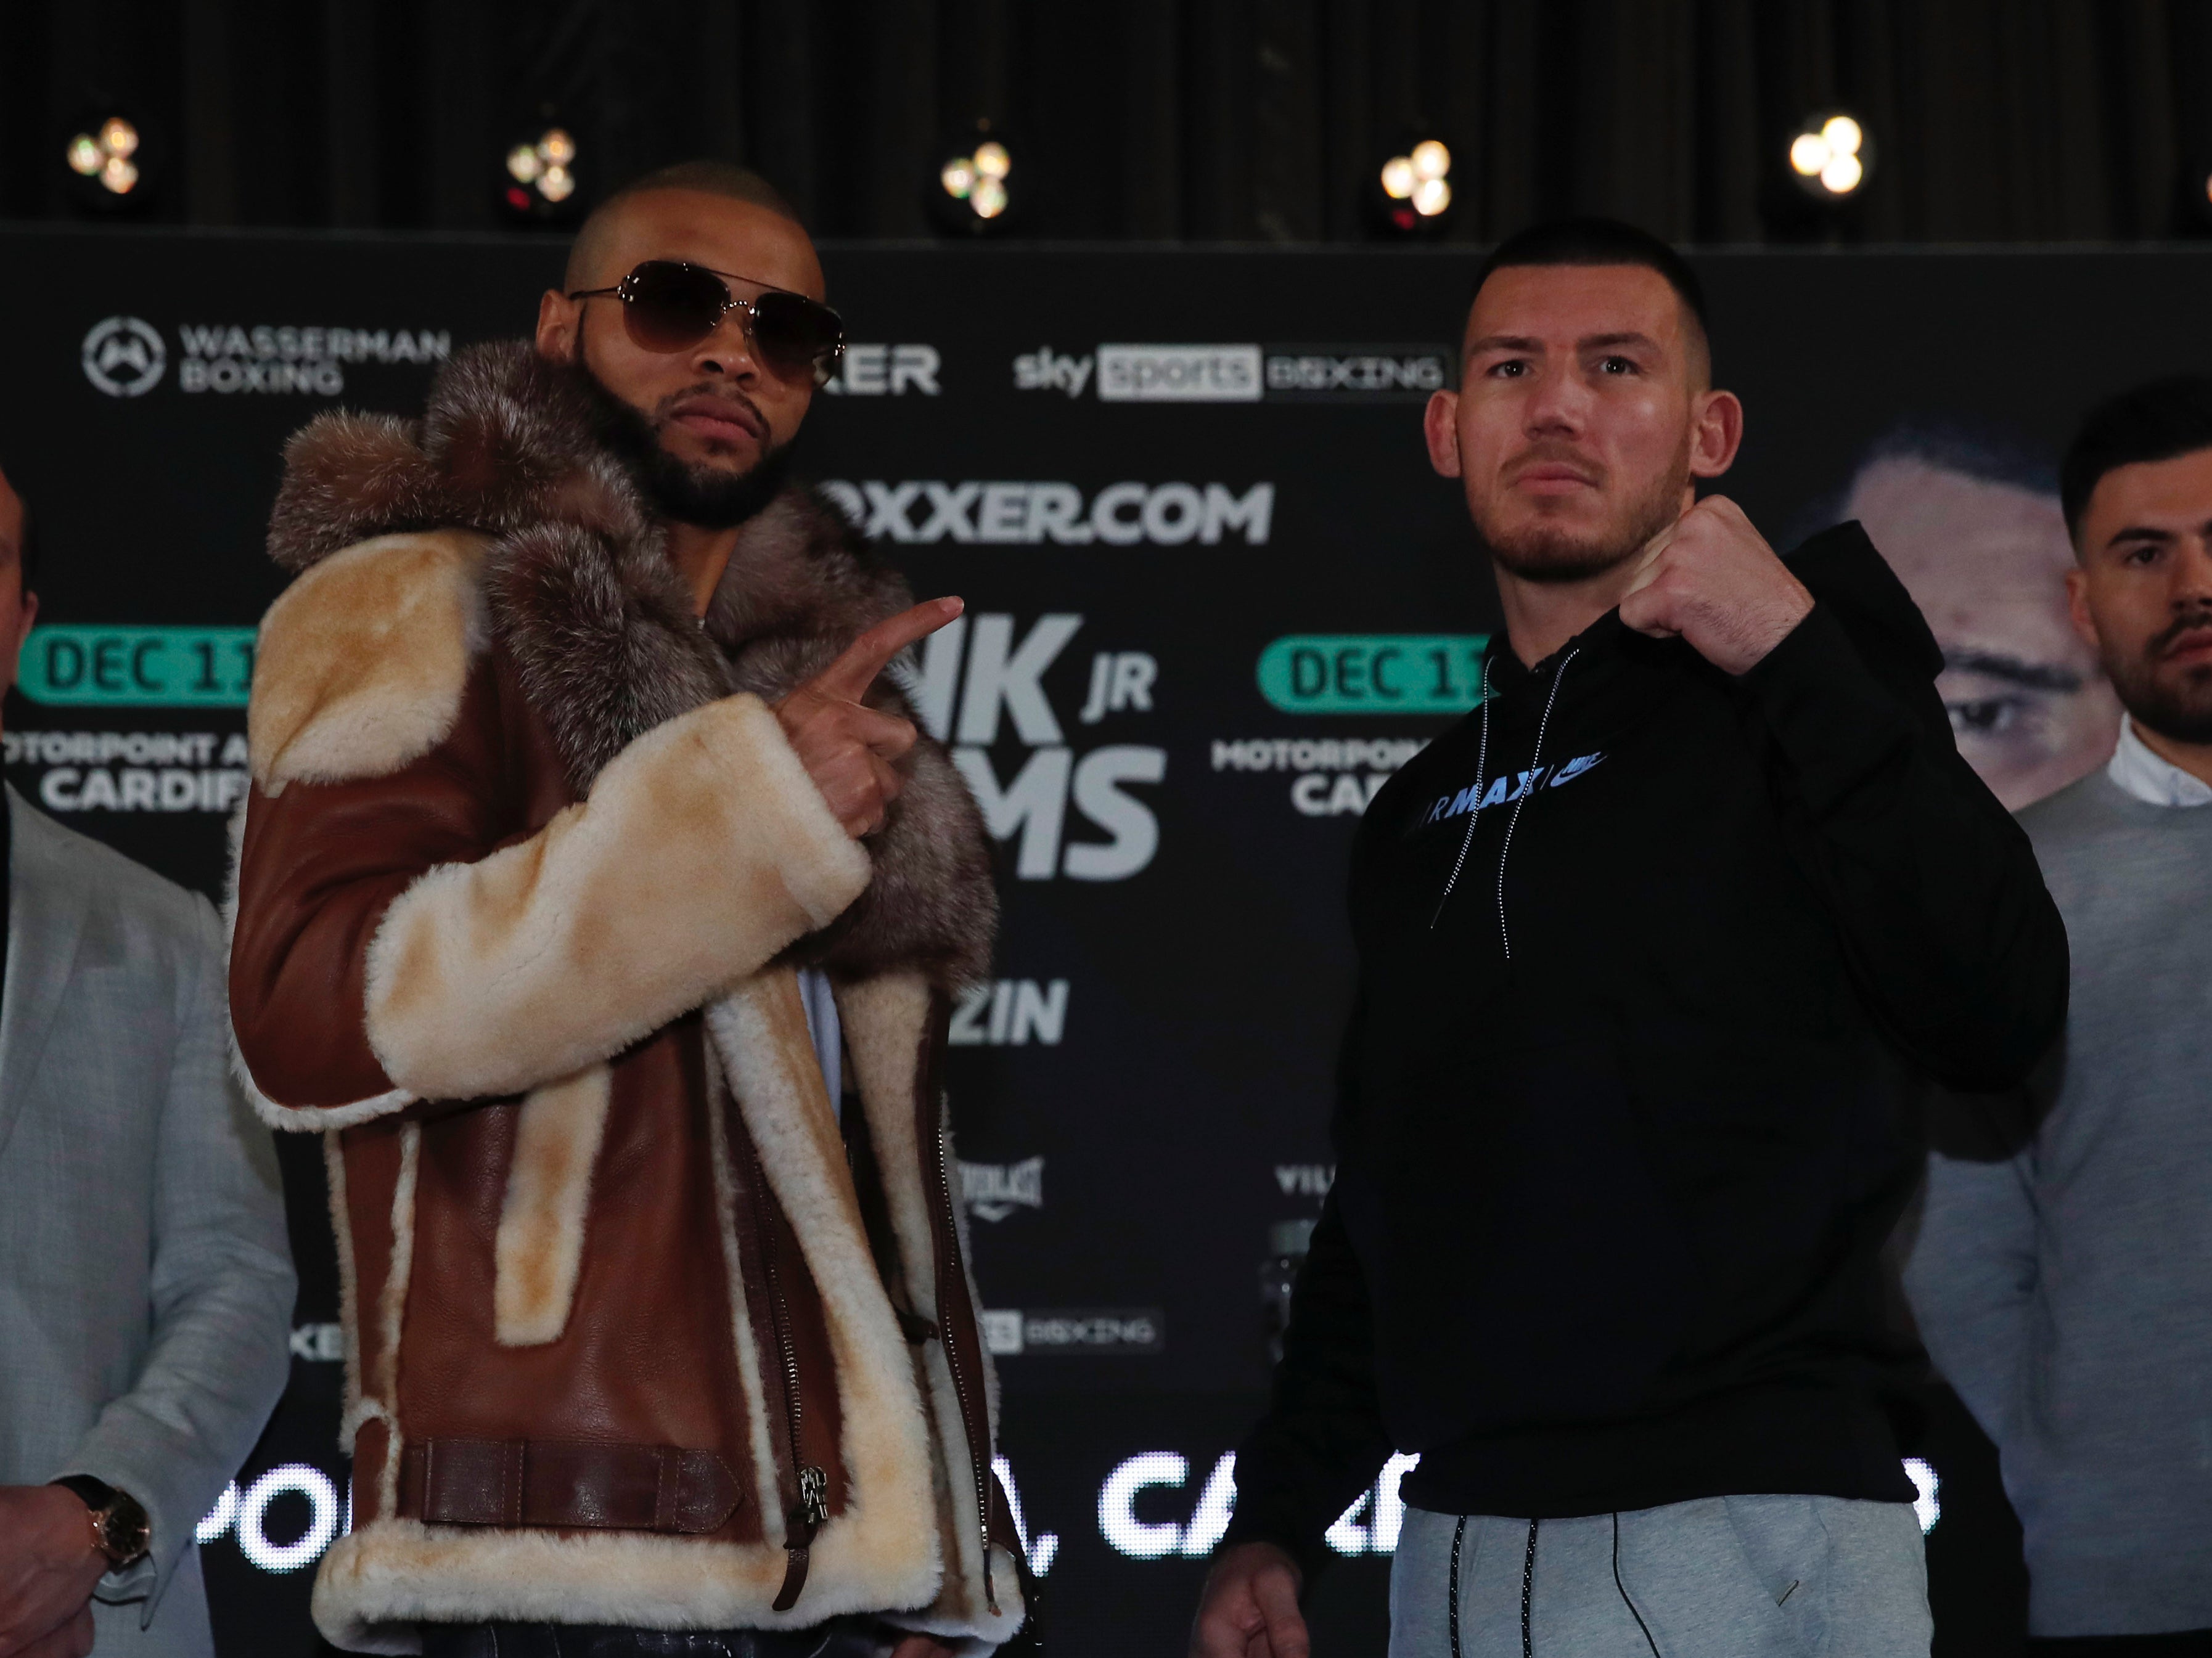 Chris Eubank Jr. has an axe to grind with Liam Williams